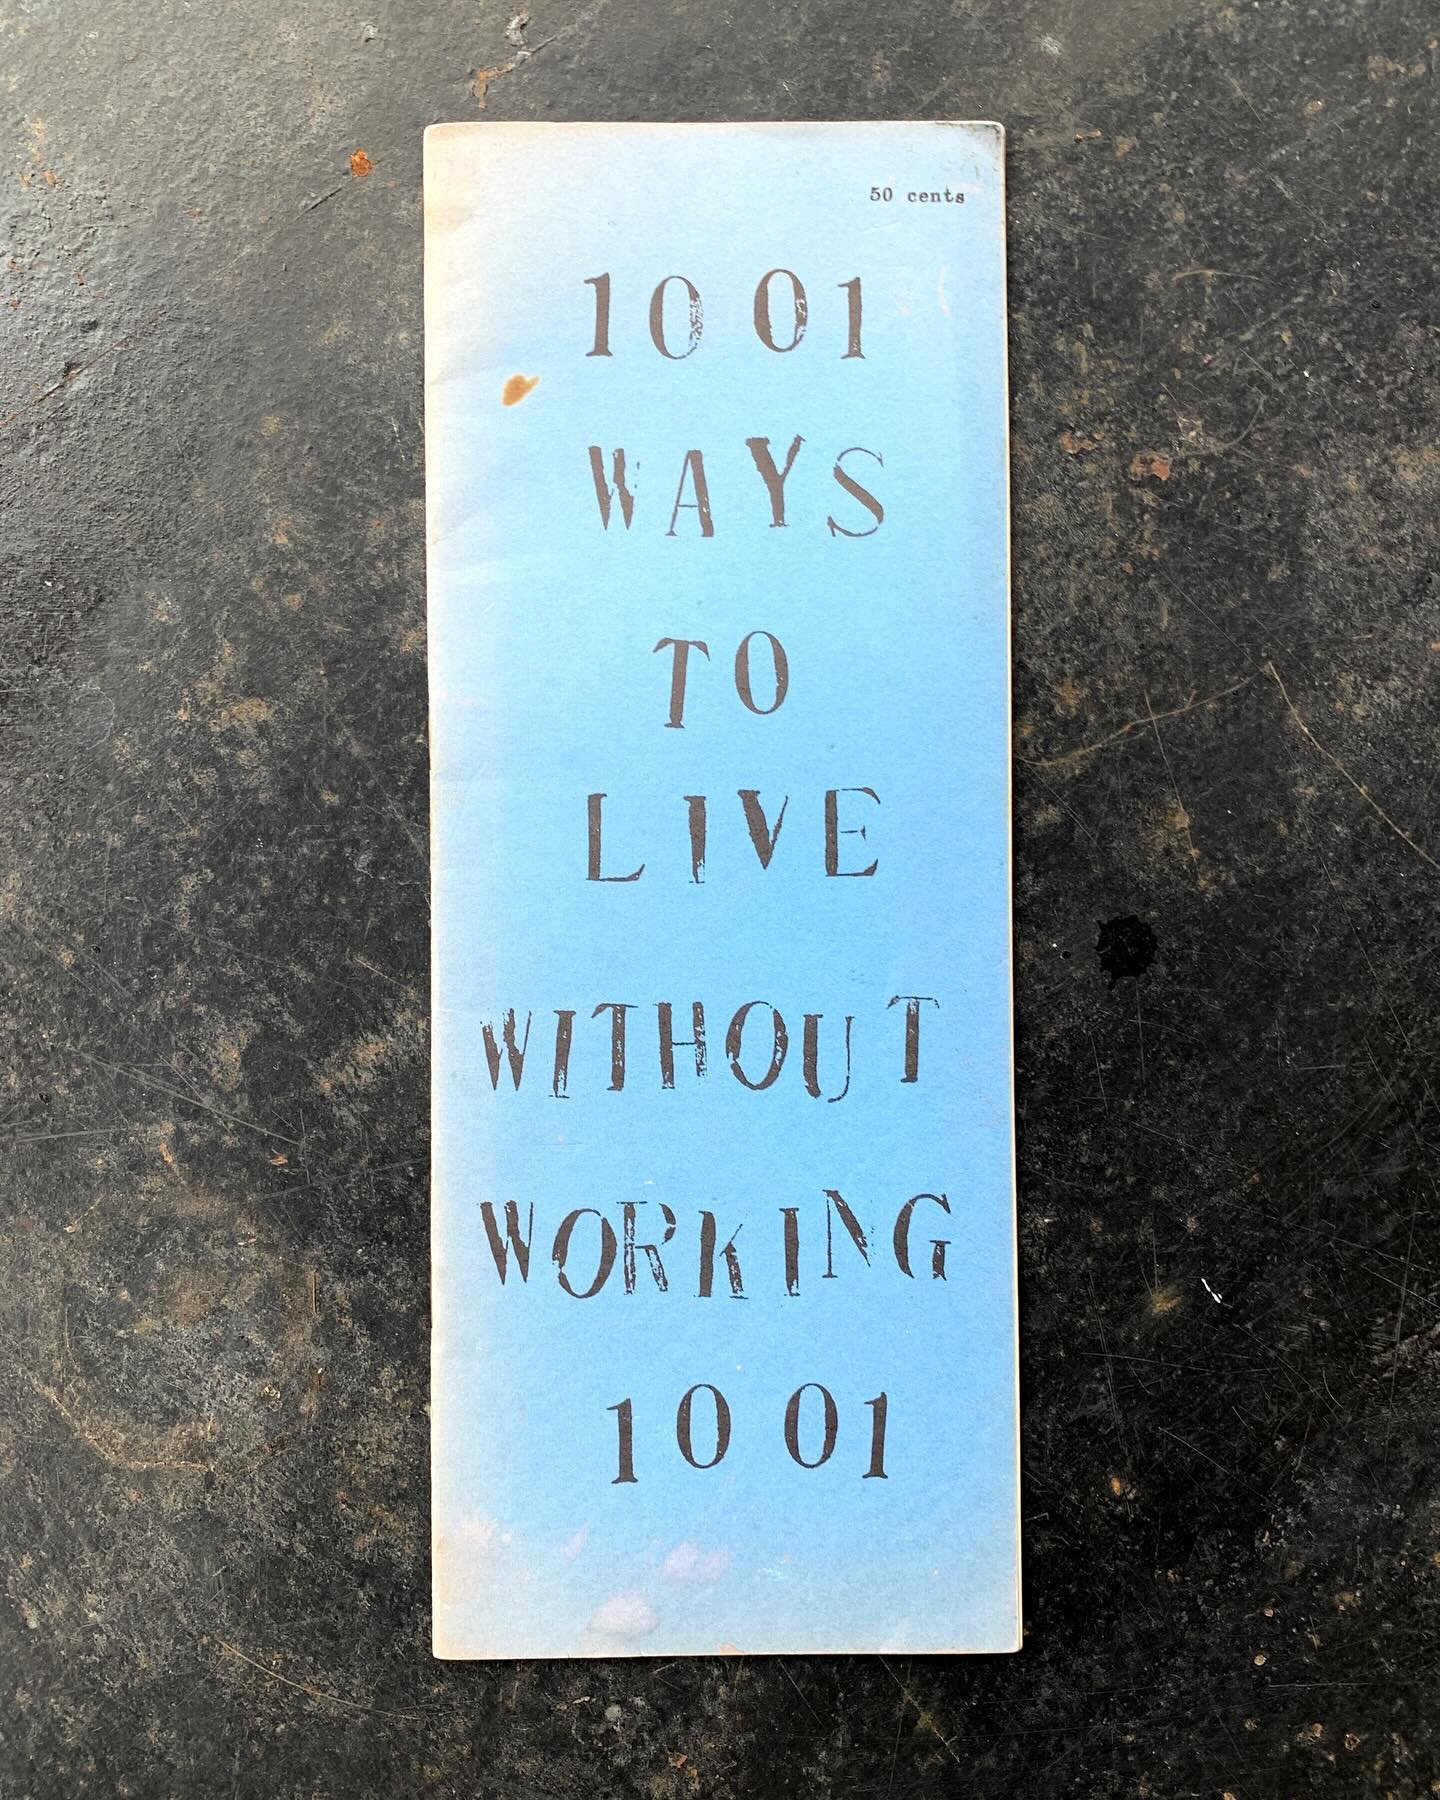 1001 Ways to Live Without Working. Tuli Kupfenberg first edition from 1961. Like most counter culture work, this wasn&rsquo;t made in vast numbers and was definitely not intended to be attractive to vast numbers of people, so is a  rare survivor.  Av